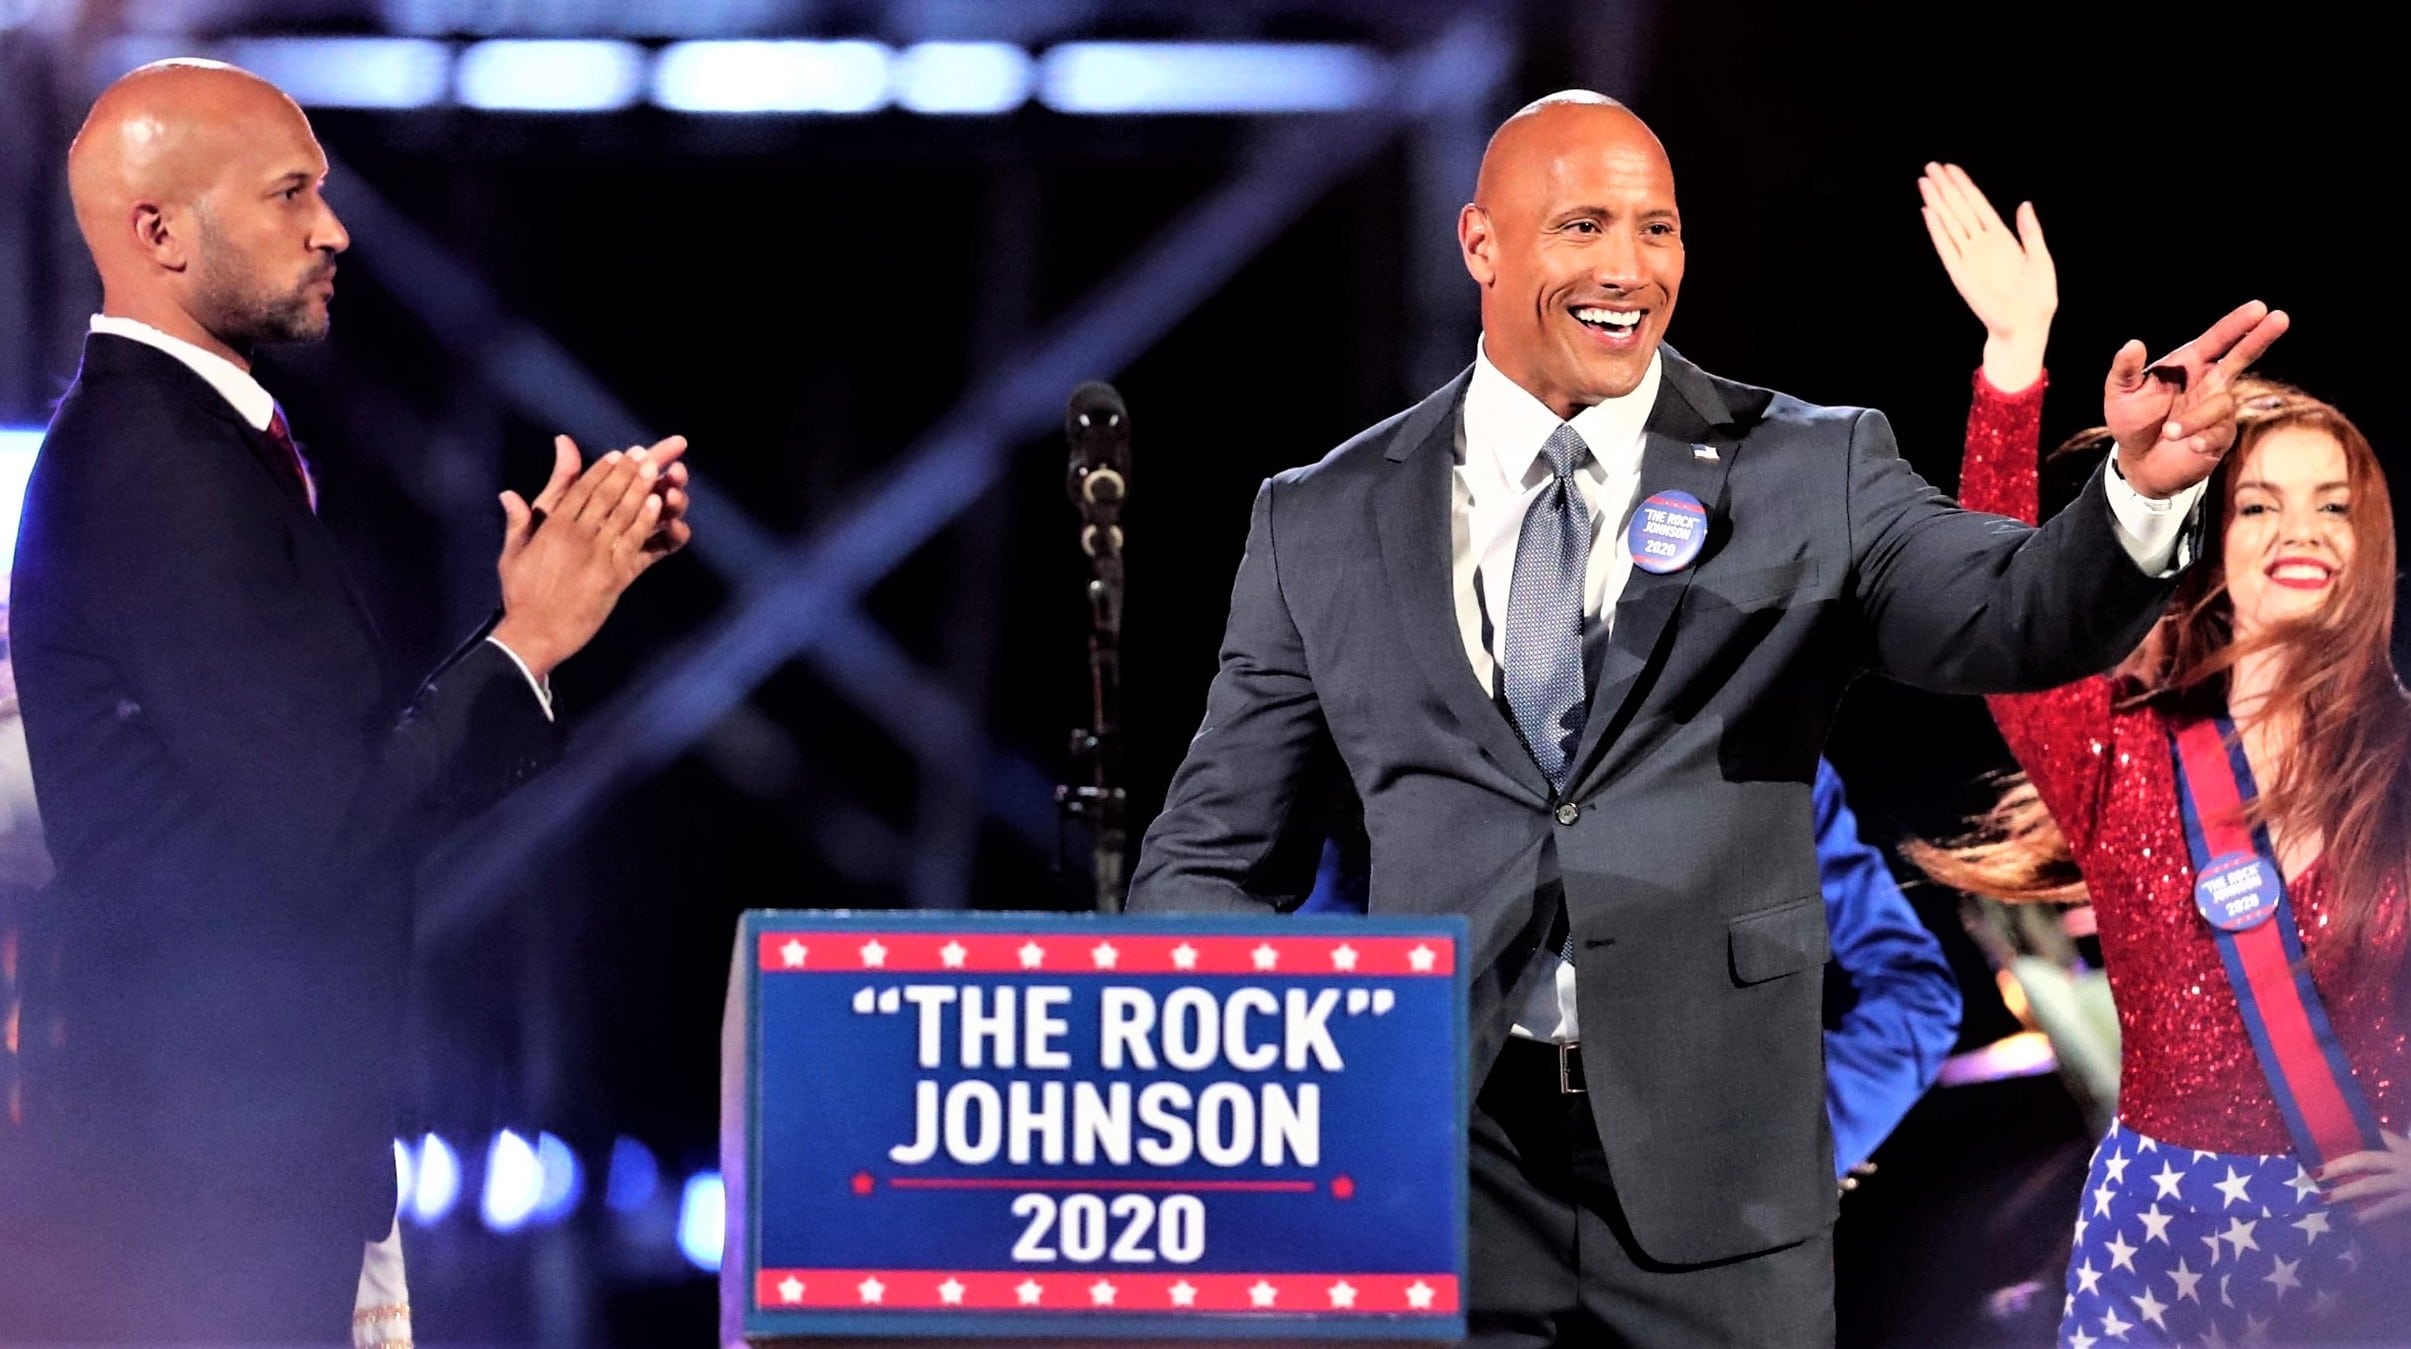 Chris Jericho Talks About Why Dwayne ‘The Rock’ Johnson Could Win 2020 Presidential Elections